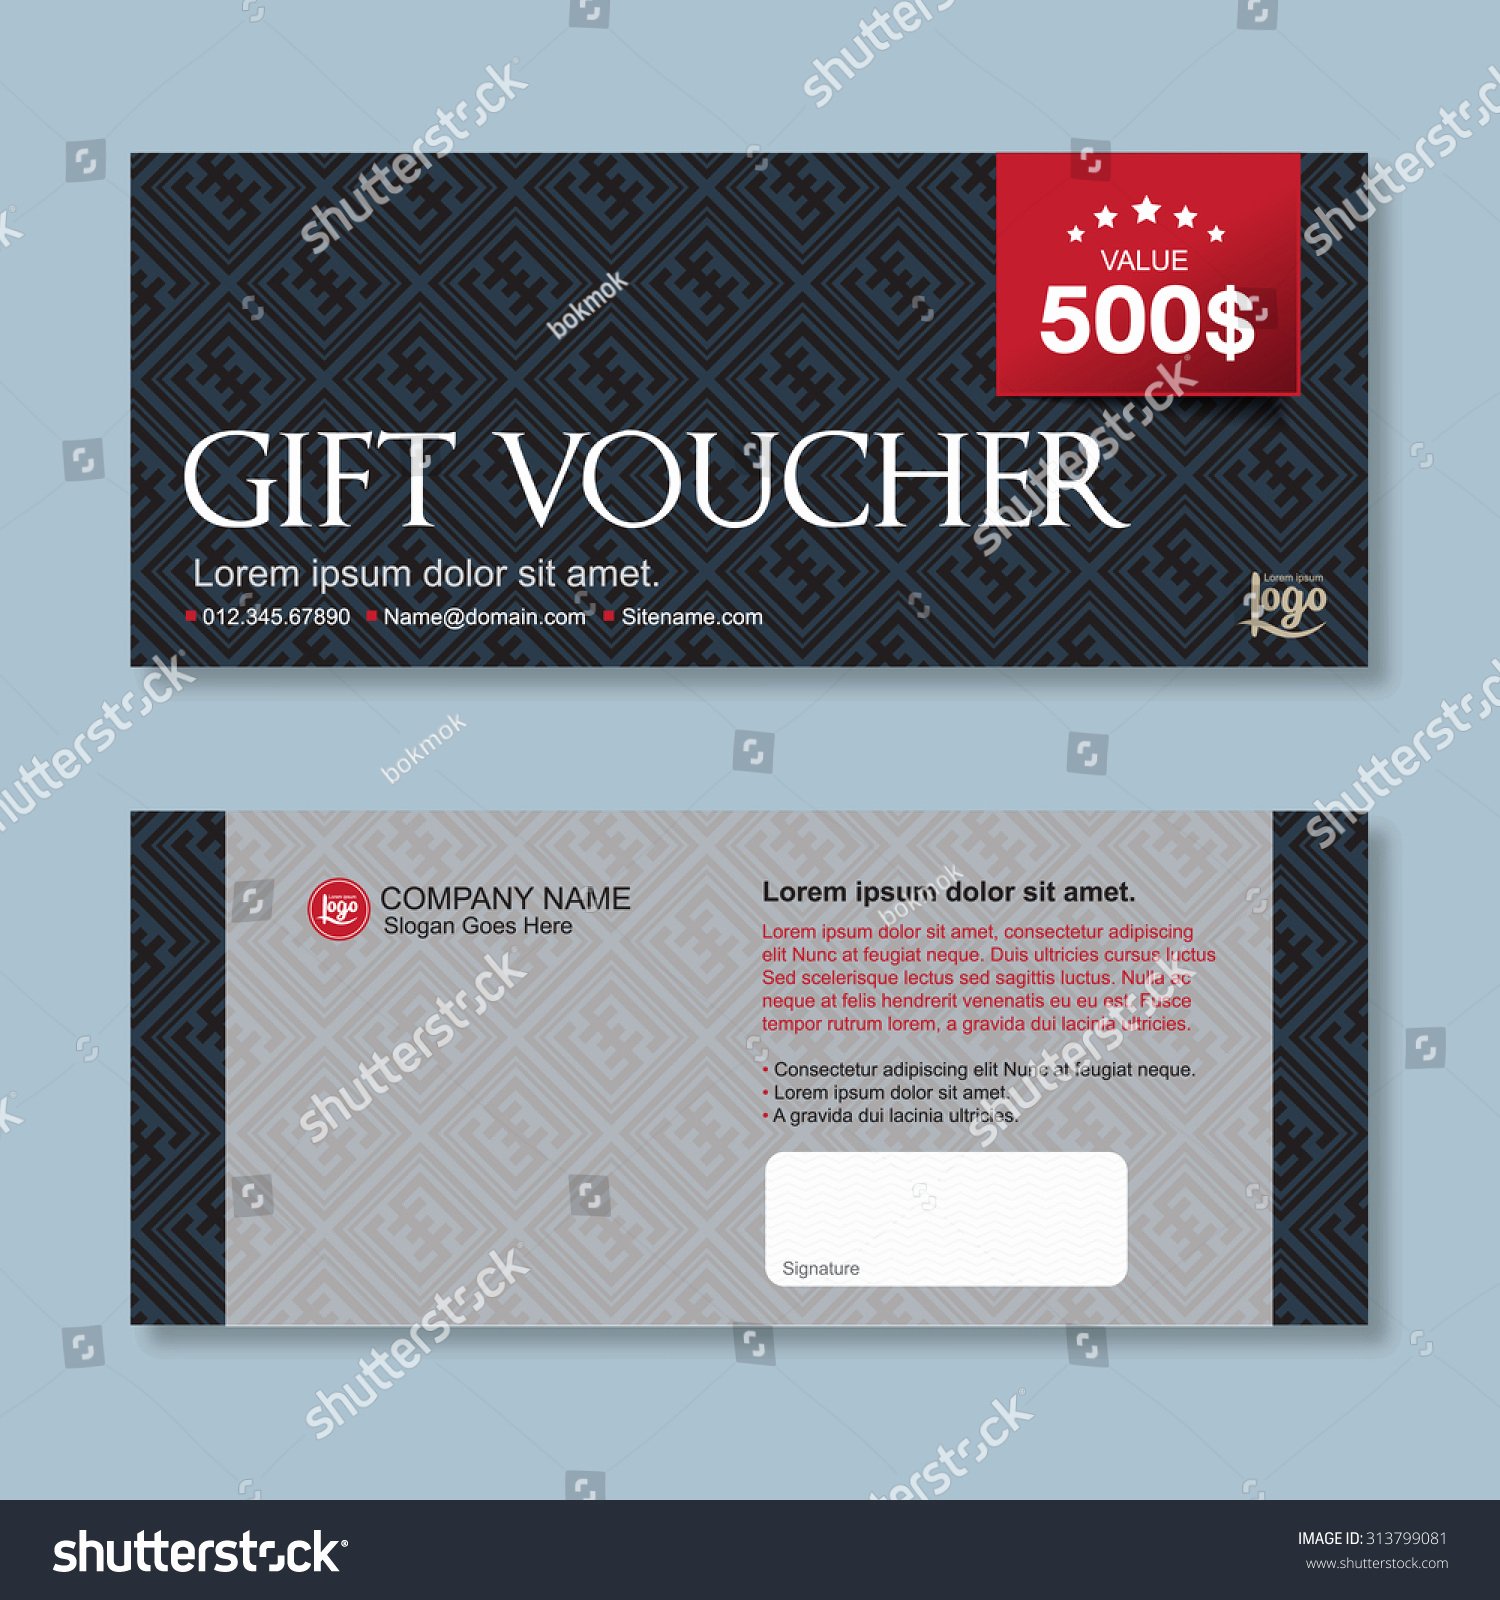 Cute Gift Certificate Template Inspirational Gift Voucher Template with Colorful Pattern Cute Gift